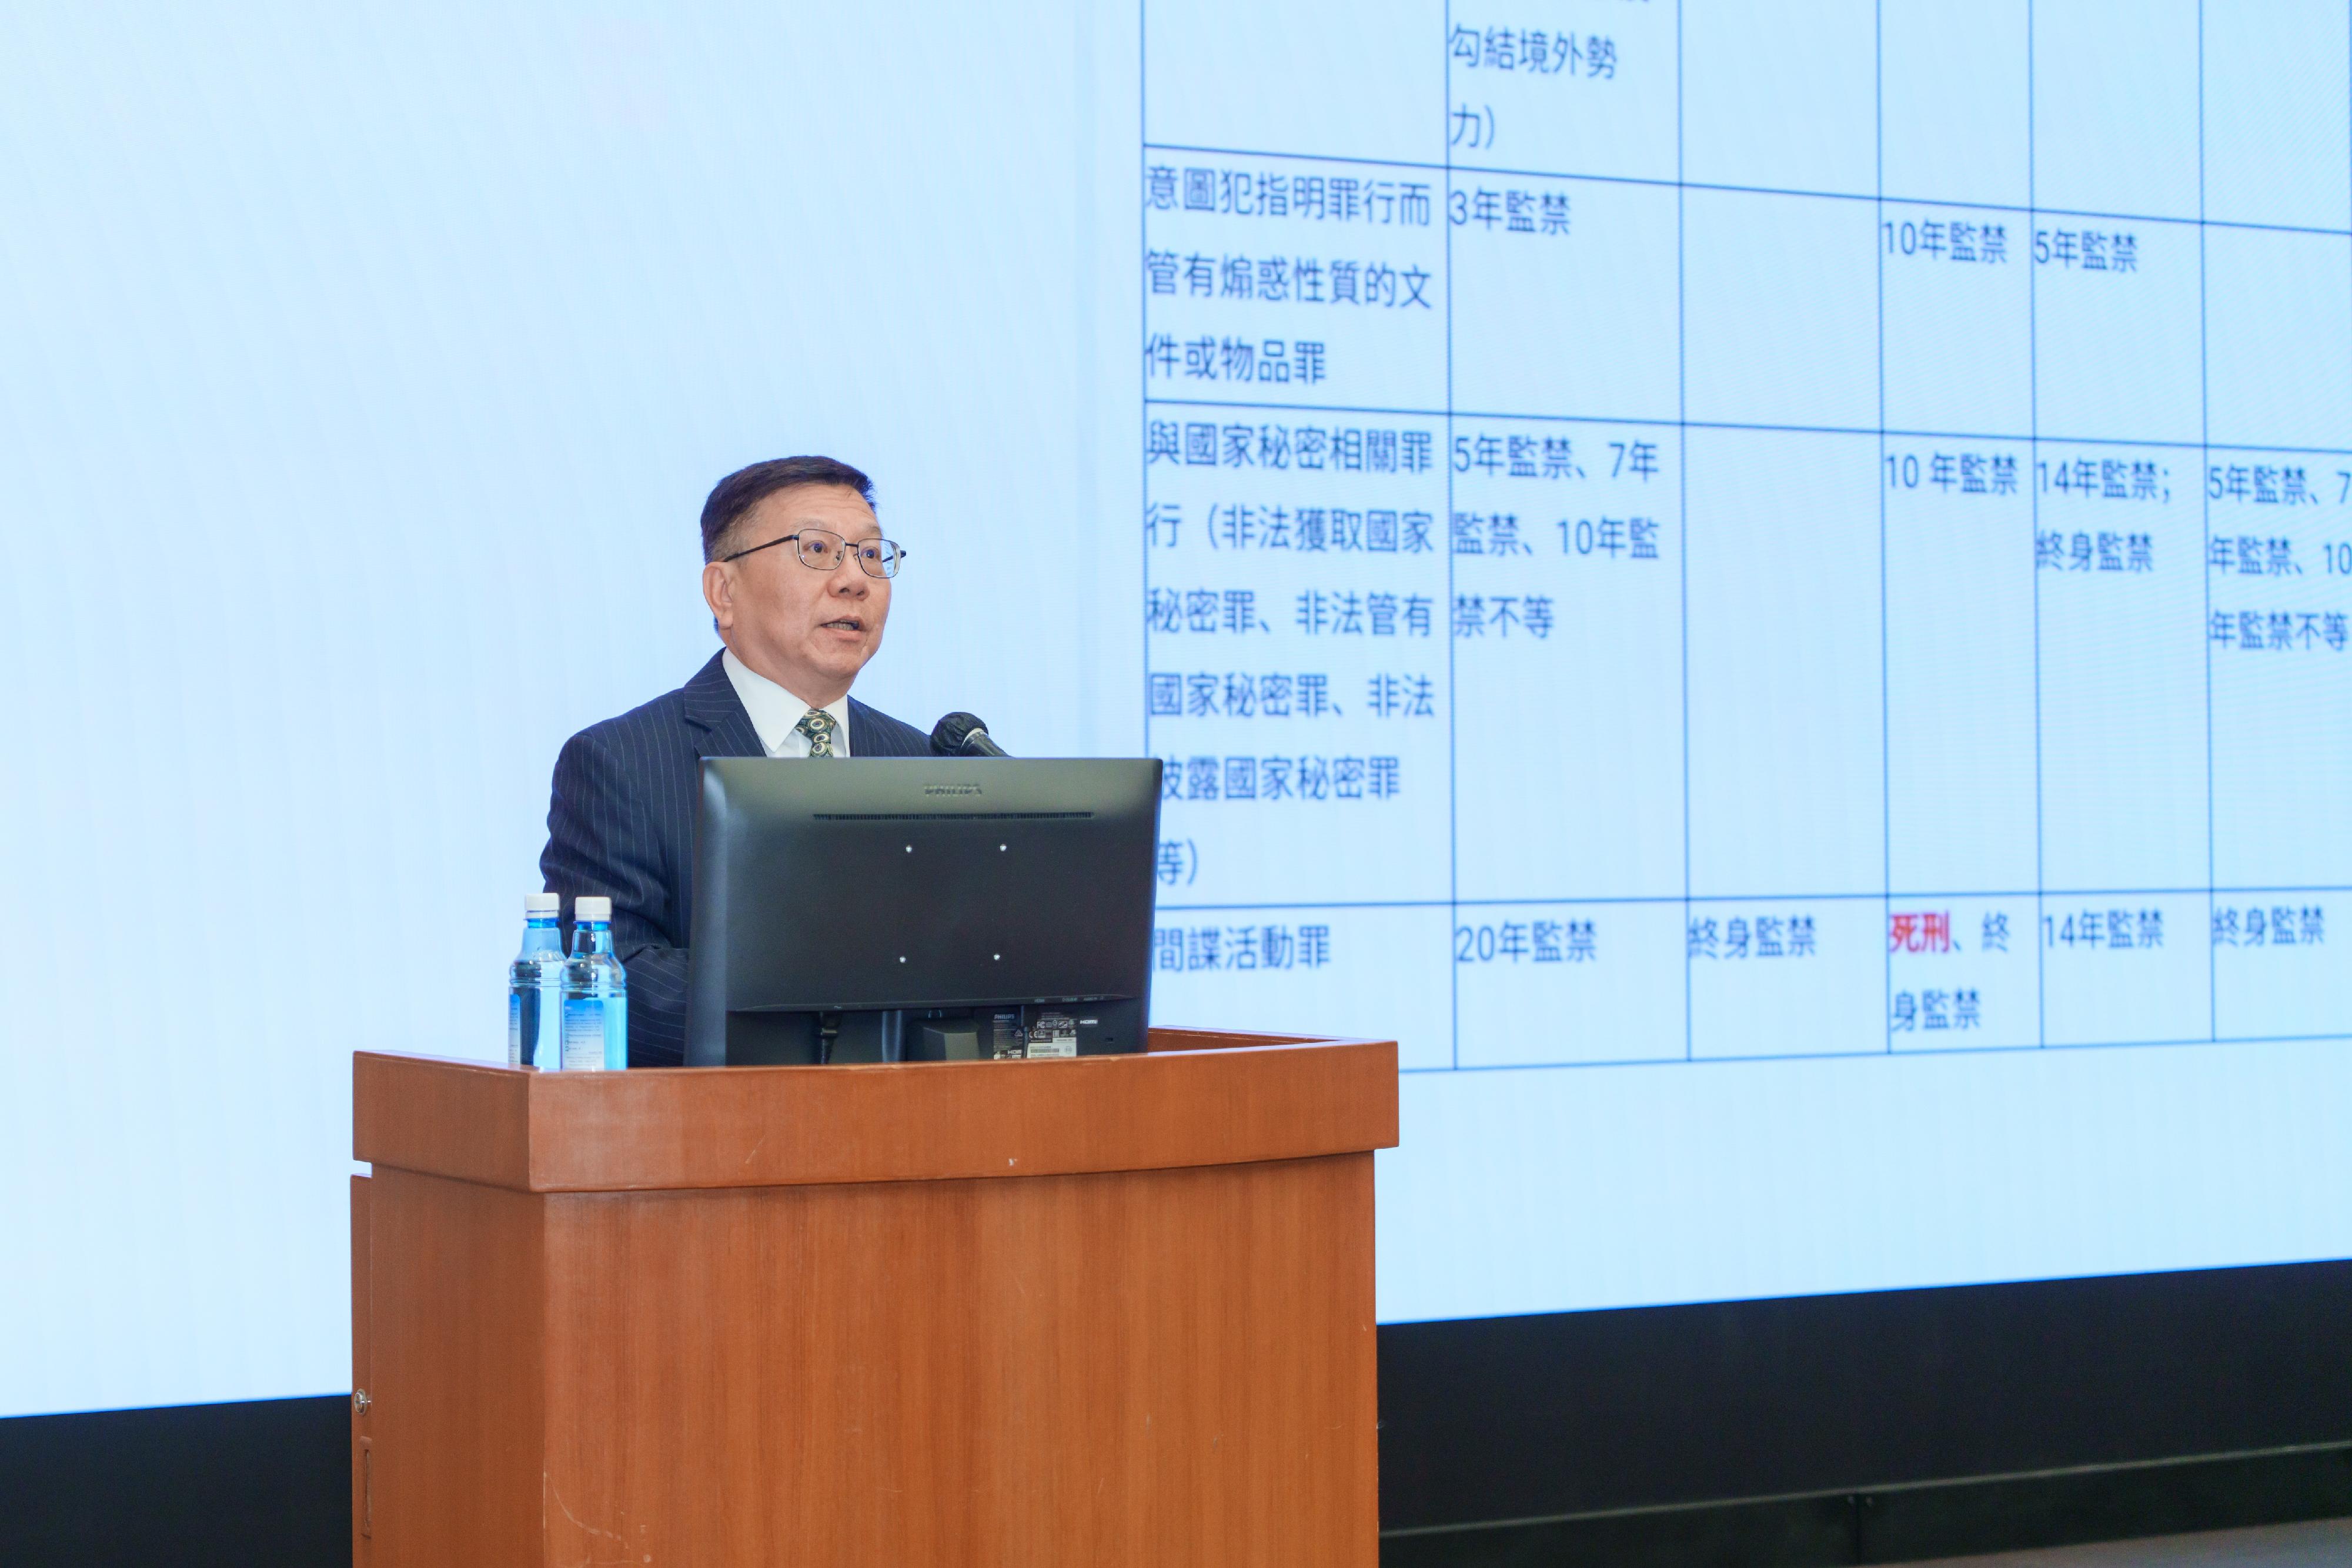 The Civil Aid Service held an open day at its headquarters today (April 14) to promote the National Security Education Day. Photo shows Professor Gu Min-kang from the Education University of Hong Kong sharing information on national security with members of the public.